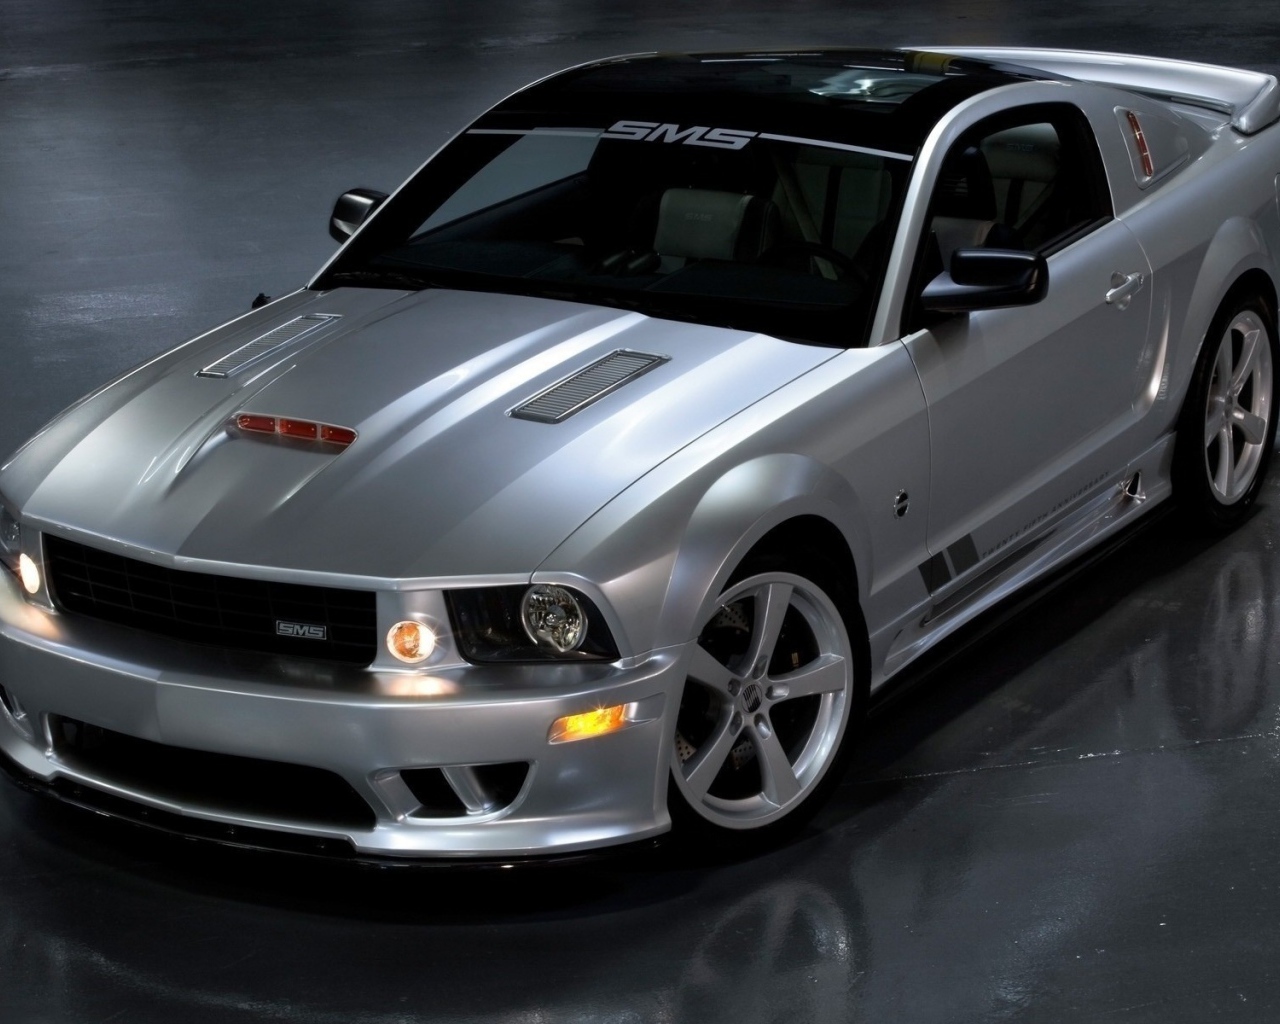 Silver Mustang on the concrete floor